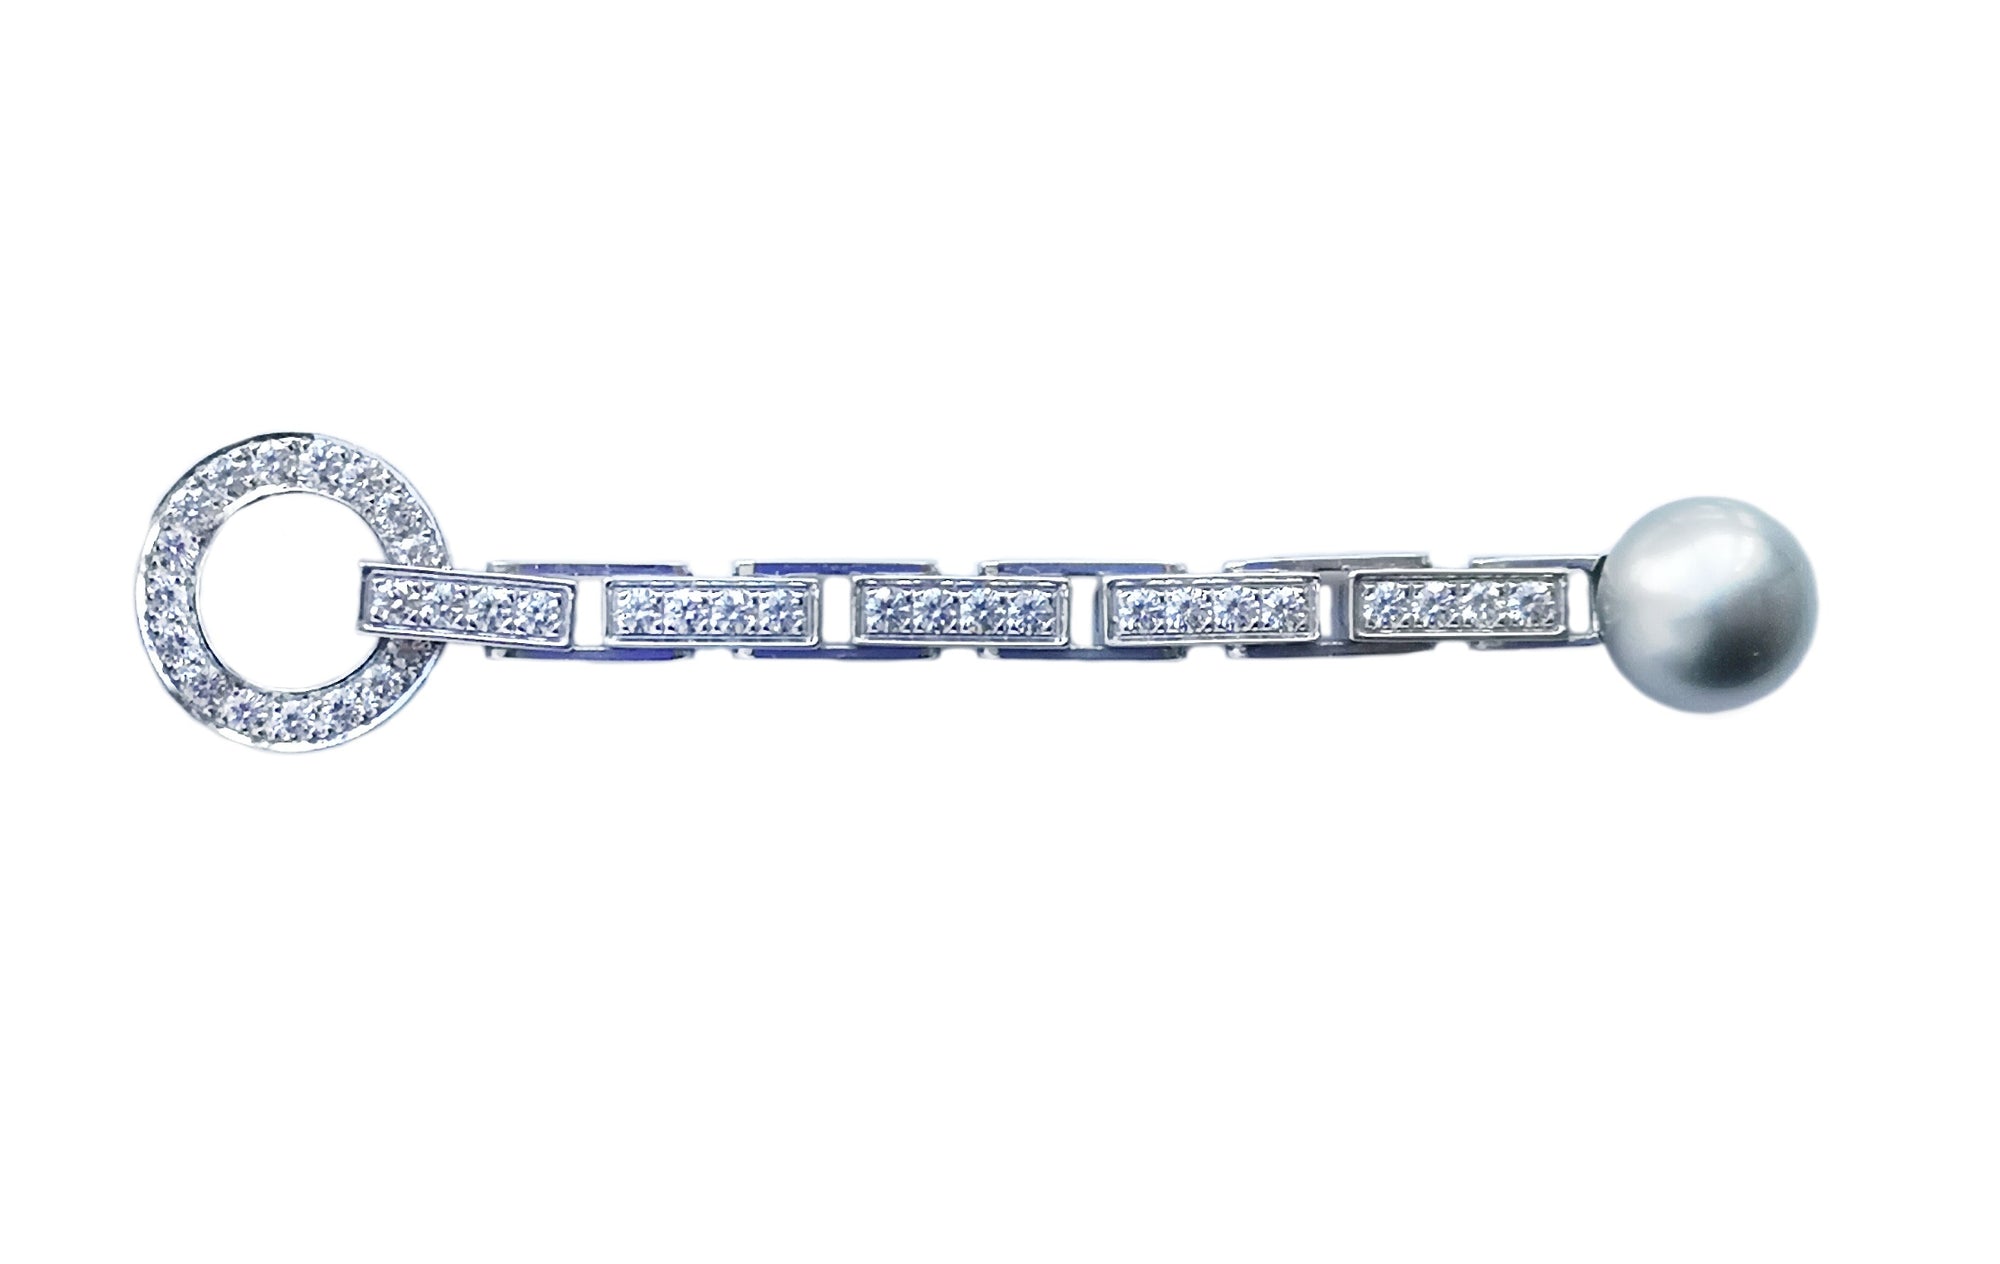 Cartier Diamond & Pearl Agrafe Necklace in 18k White Gold